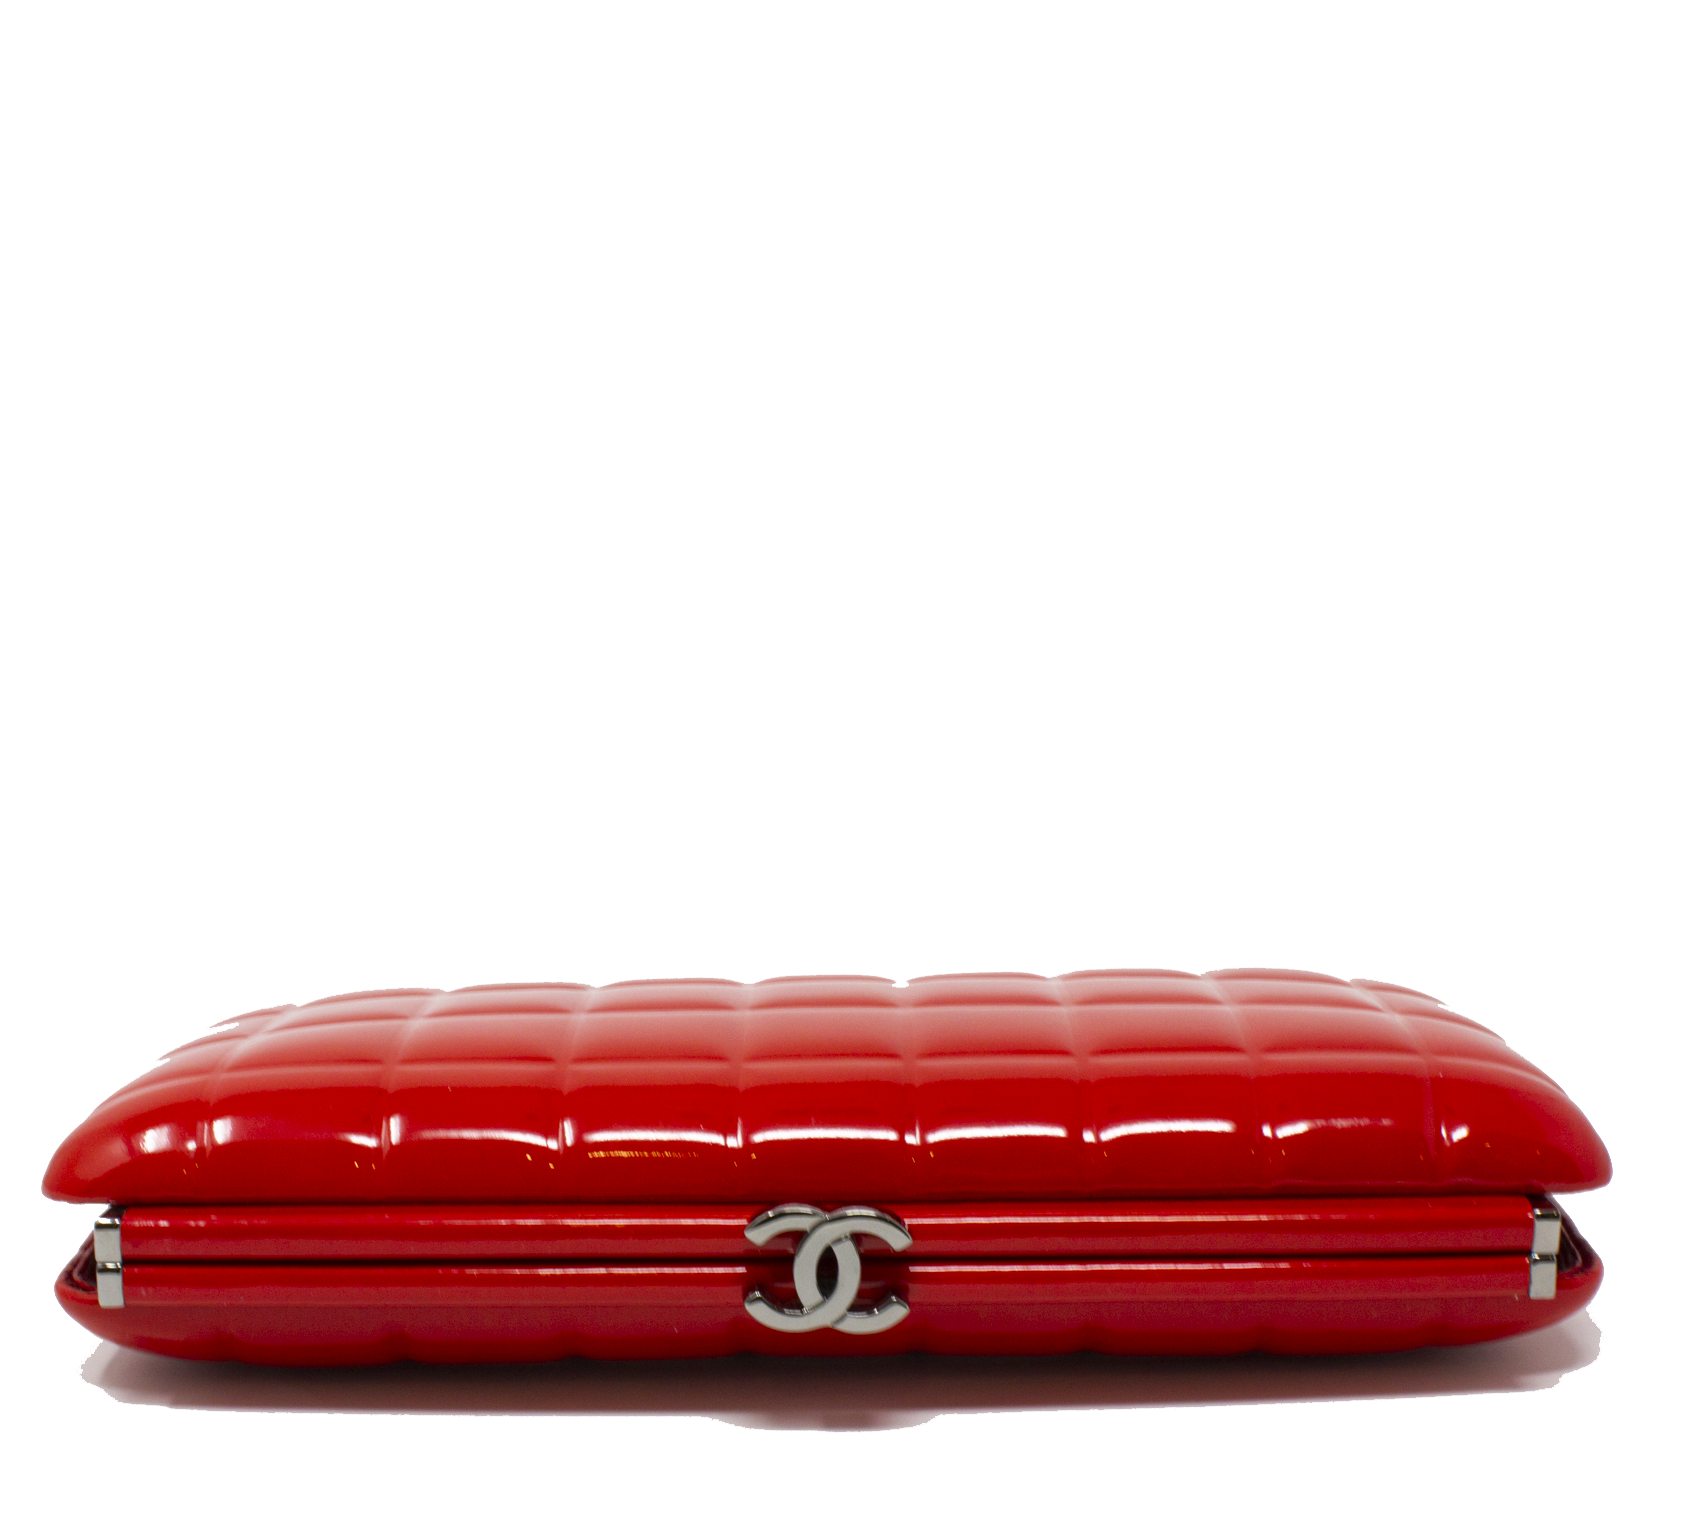 CHANEL, RED LIMITED EDITION CHOCOLATE BAR HEART CLUTCH IN PERSPEX WITH  GOLD TONE WRISTLET CHAIN, 2002/2003, Handbags and Accessories, 2020